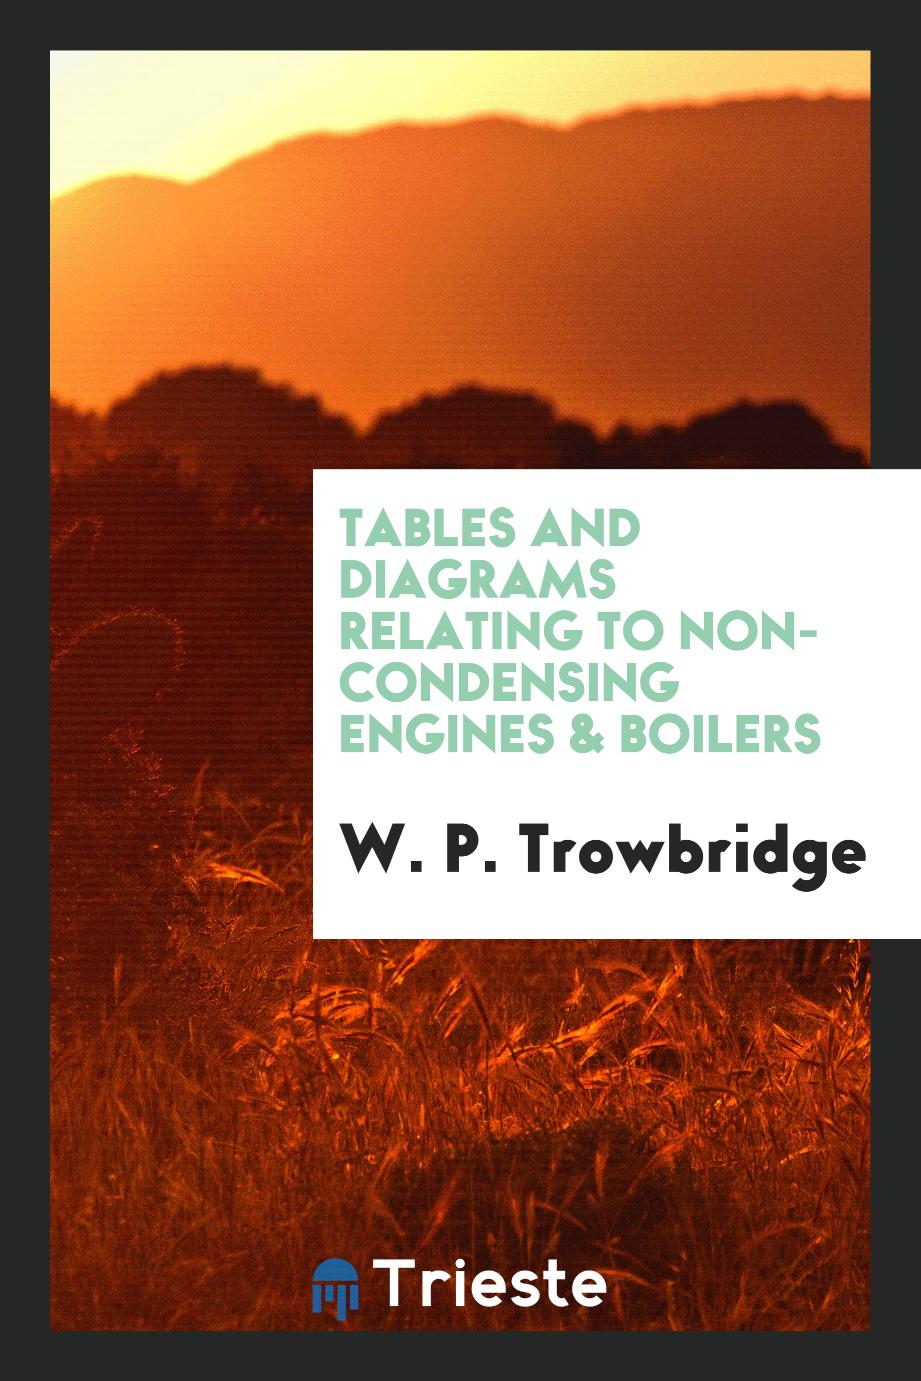 Tables and diagrams relating to non-condensing engines & boilers